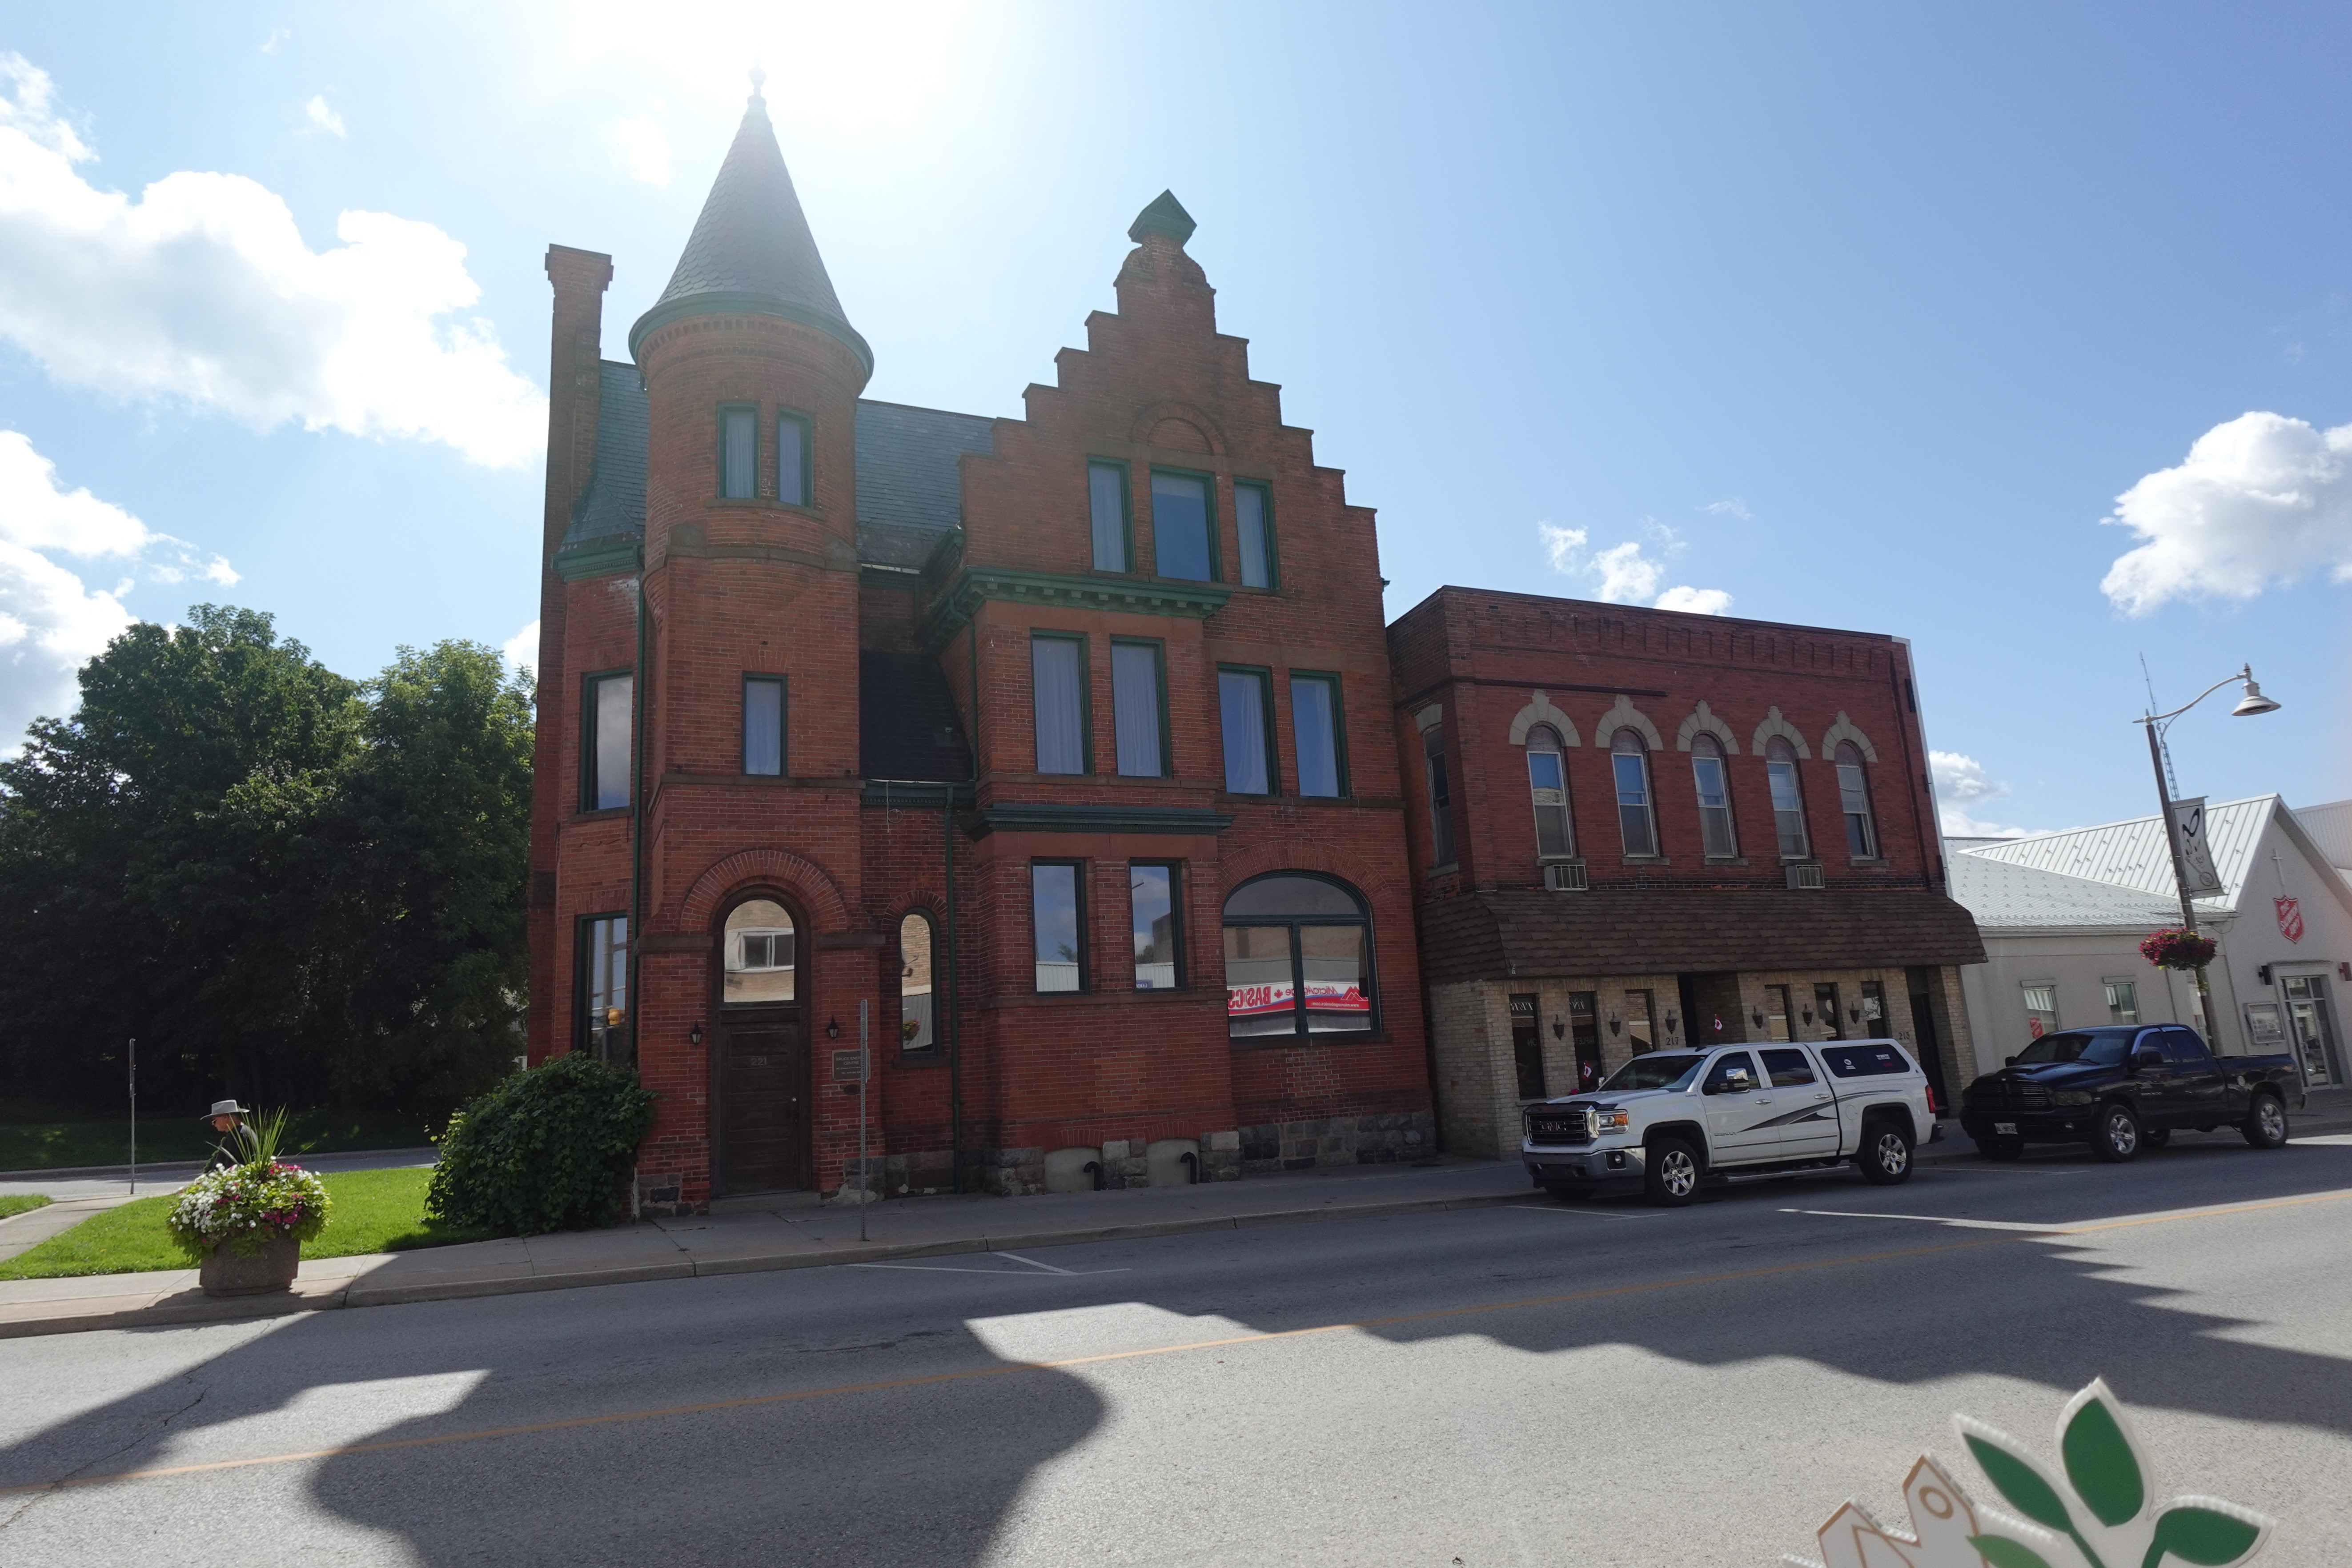 Photo of the Bank of Hamilton Building in Wingham, Ontario